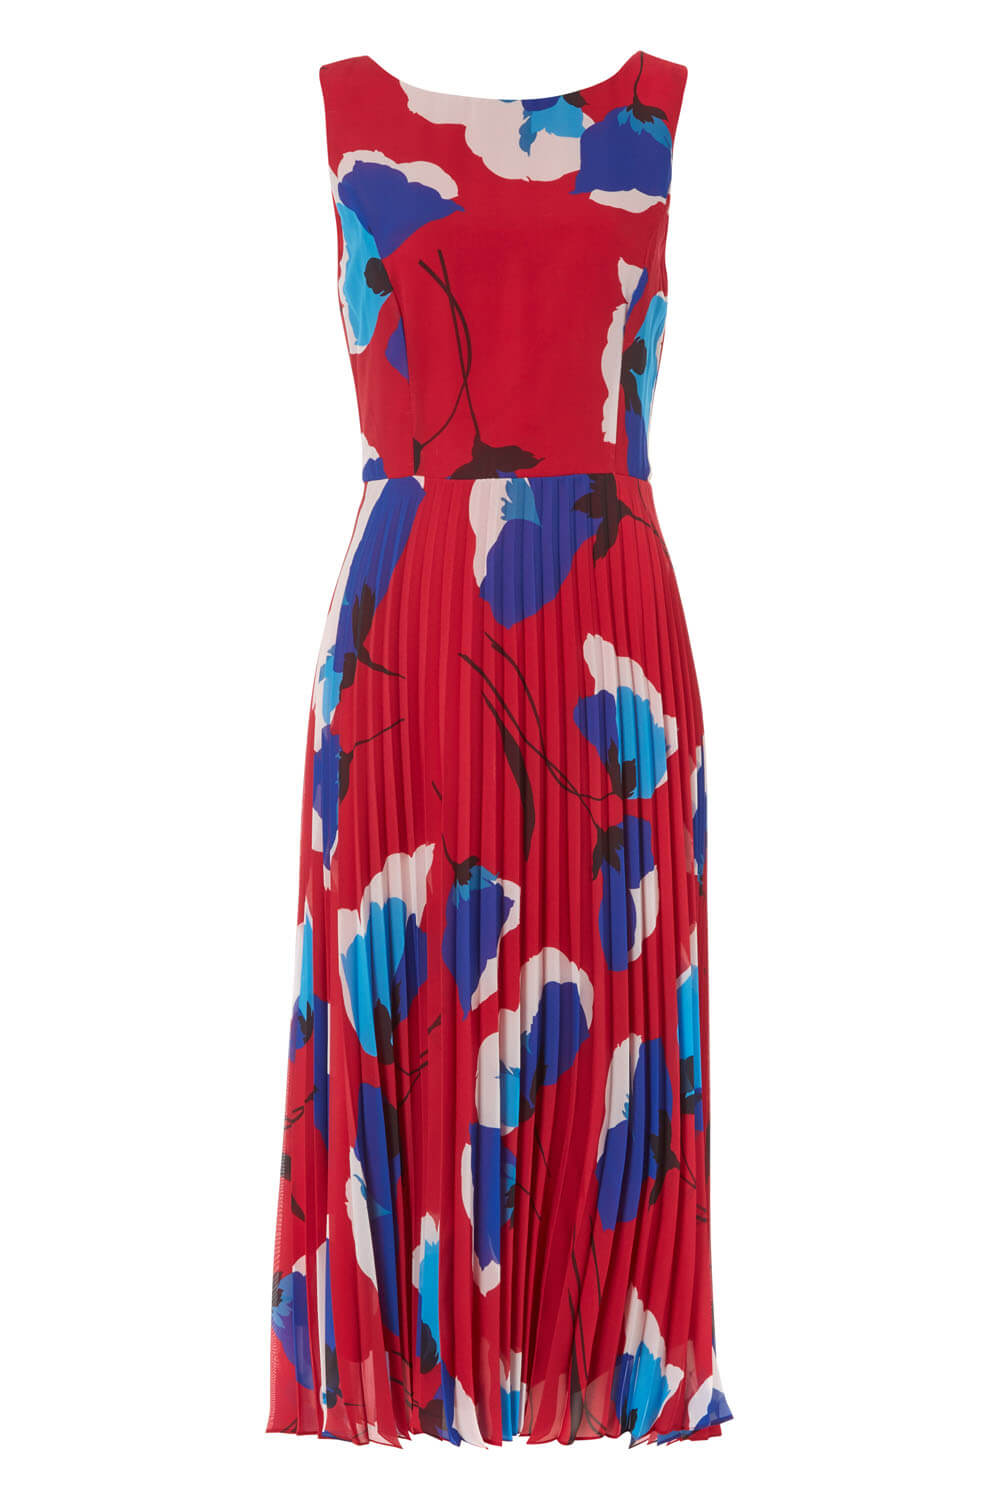 Red Floral Pleated Fit and Flare Midi Dress, Image 5 of 5